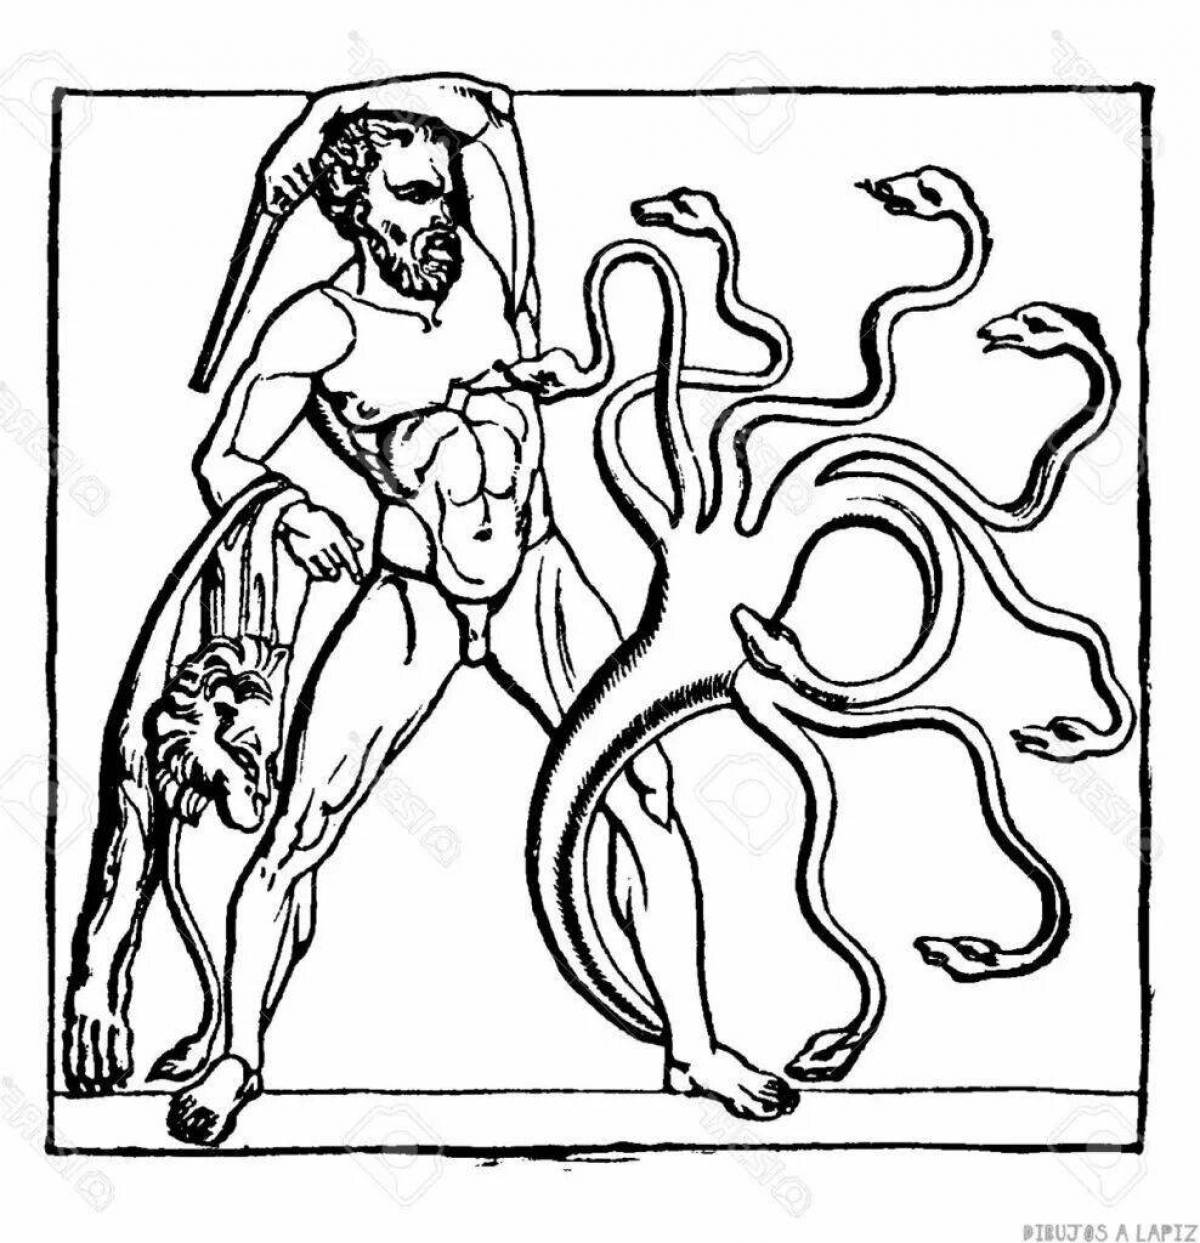 12 labors of hercules coloring pages